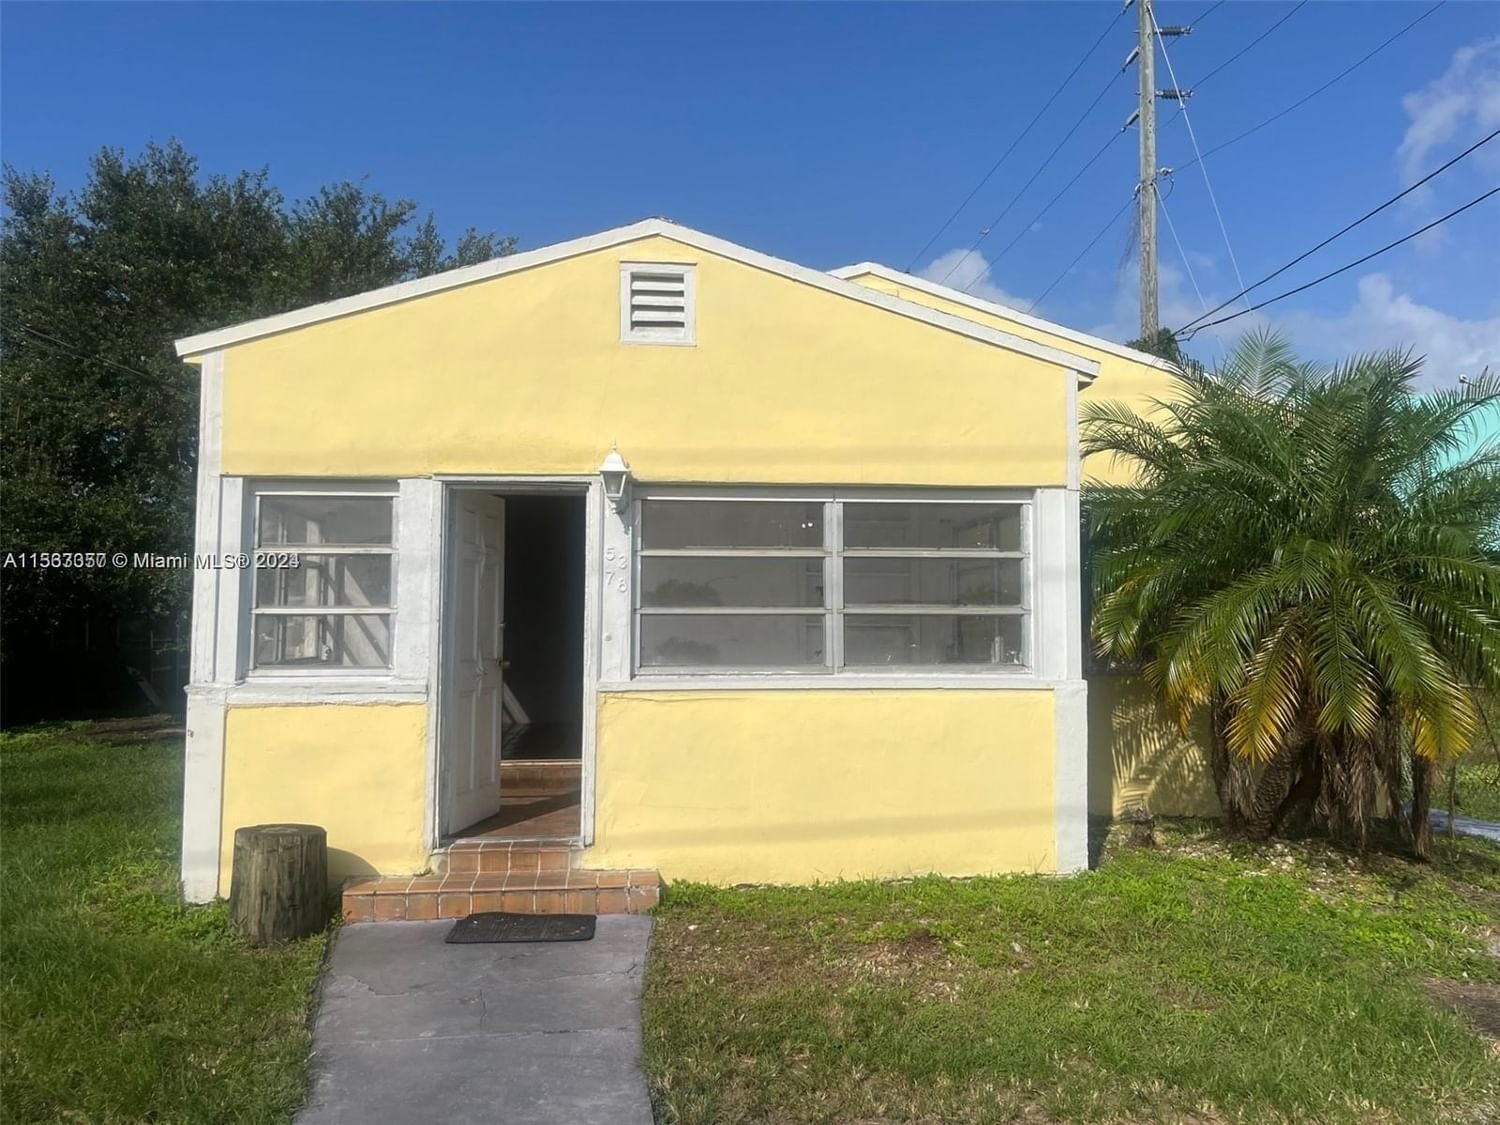 Real estate property located at 5378 29th Ave, Miami-Dade County, GLENWOOD HEIGHTS, Miami, FL